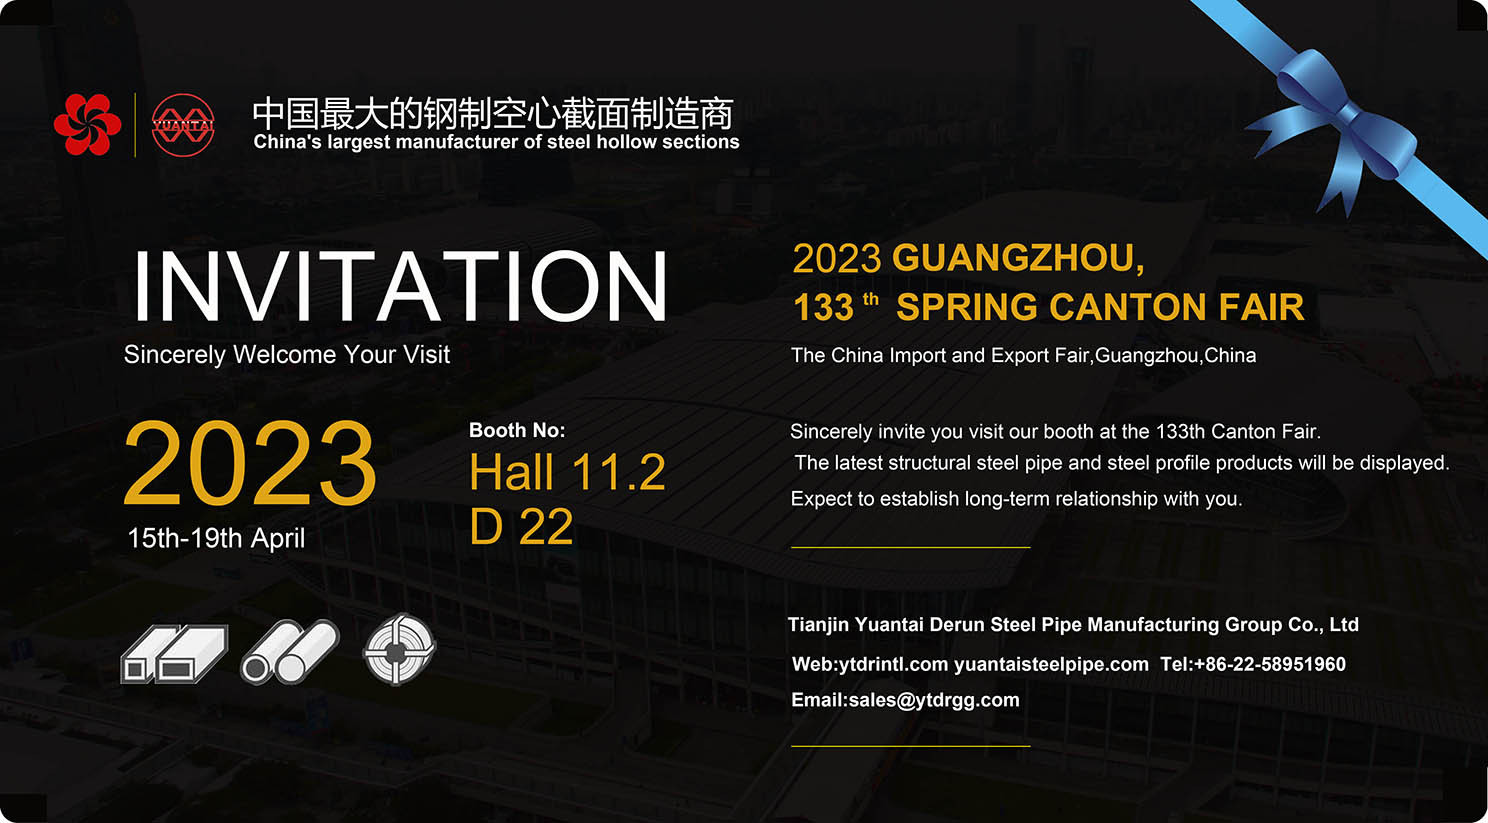 INVITATION LETTER FOR THE 133th CANTON FAIR-TIANJIN YUANTAI DERUN STEEL PIPE MANUFACTURING GROUP